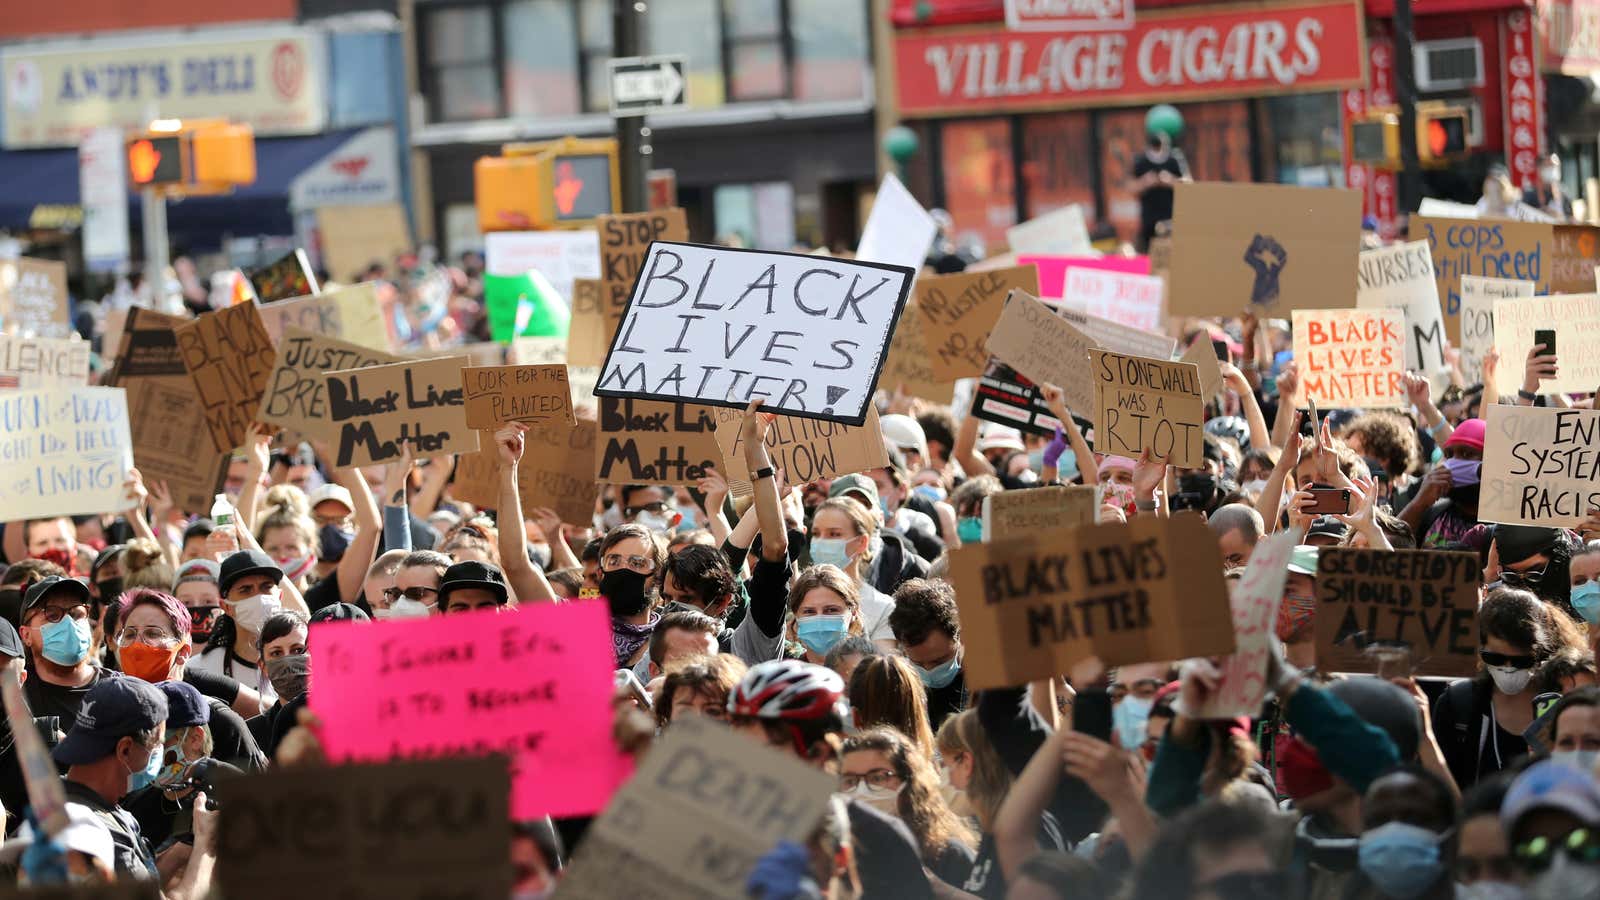 Protesters hold placards as they rally against the death in Minneapolis police custody of George Floyd, in the Manhattan borough of New York City, U.S., June 2, 2020.